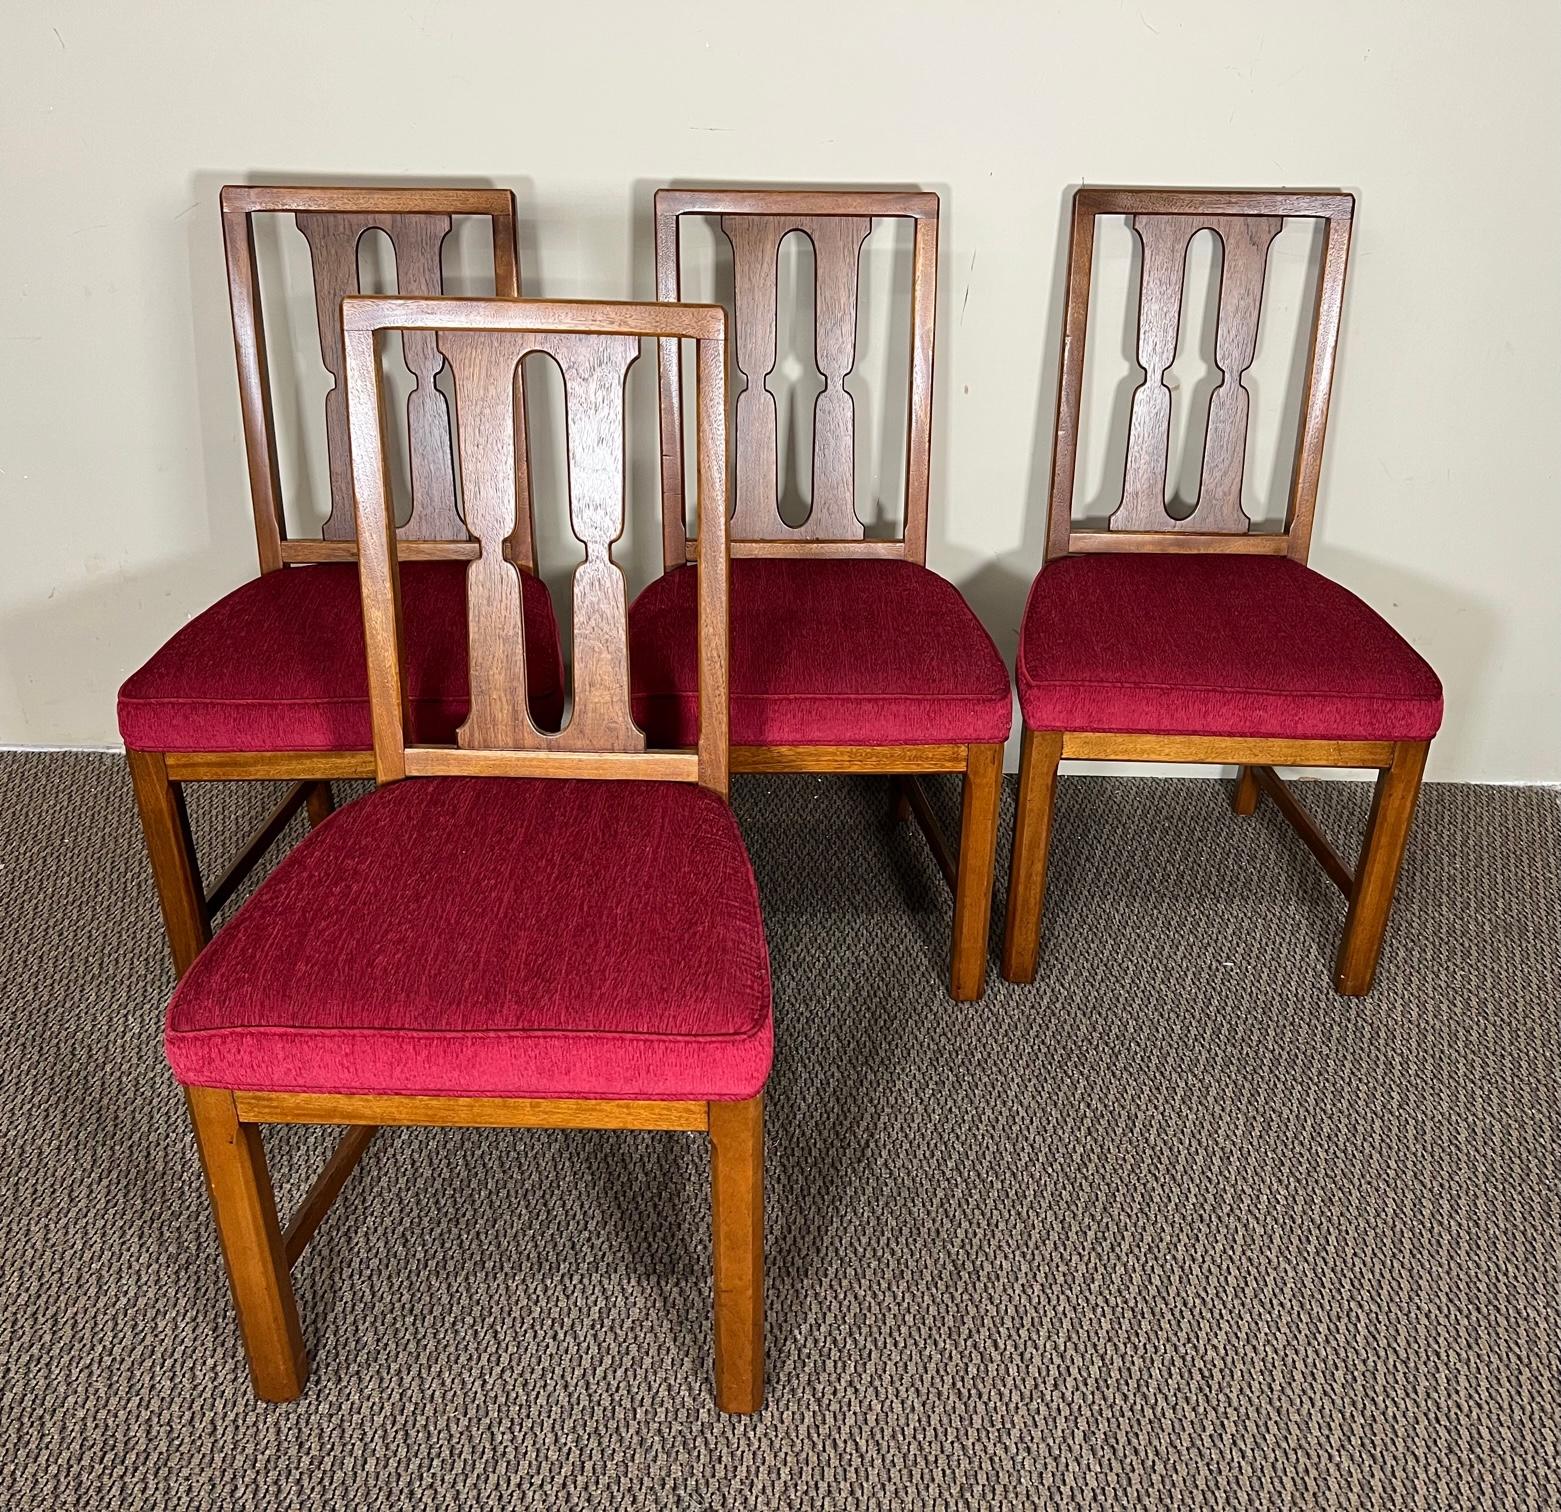 Set of 6 Mid-Century Modern walnut dining chairs. Including two with arms. Possibly by Henredon. No makers mark. They came with a table and buffet by Henredon. (Listed separately)

Very good vintage condition. Some minor scratches, small gouges on